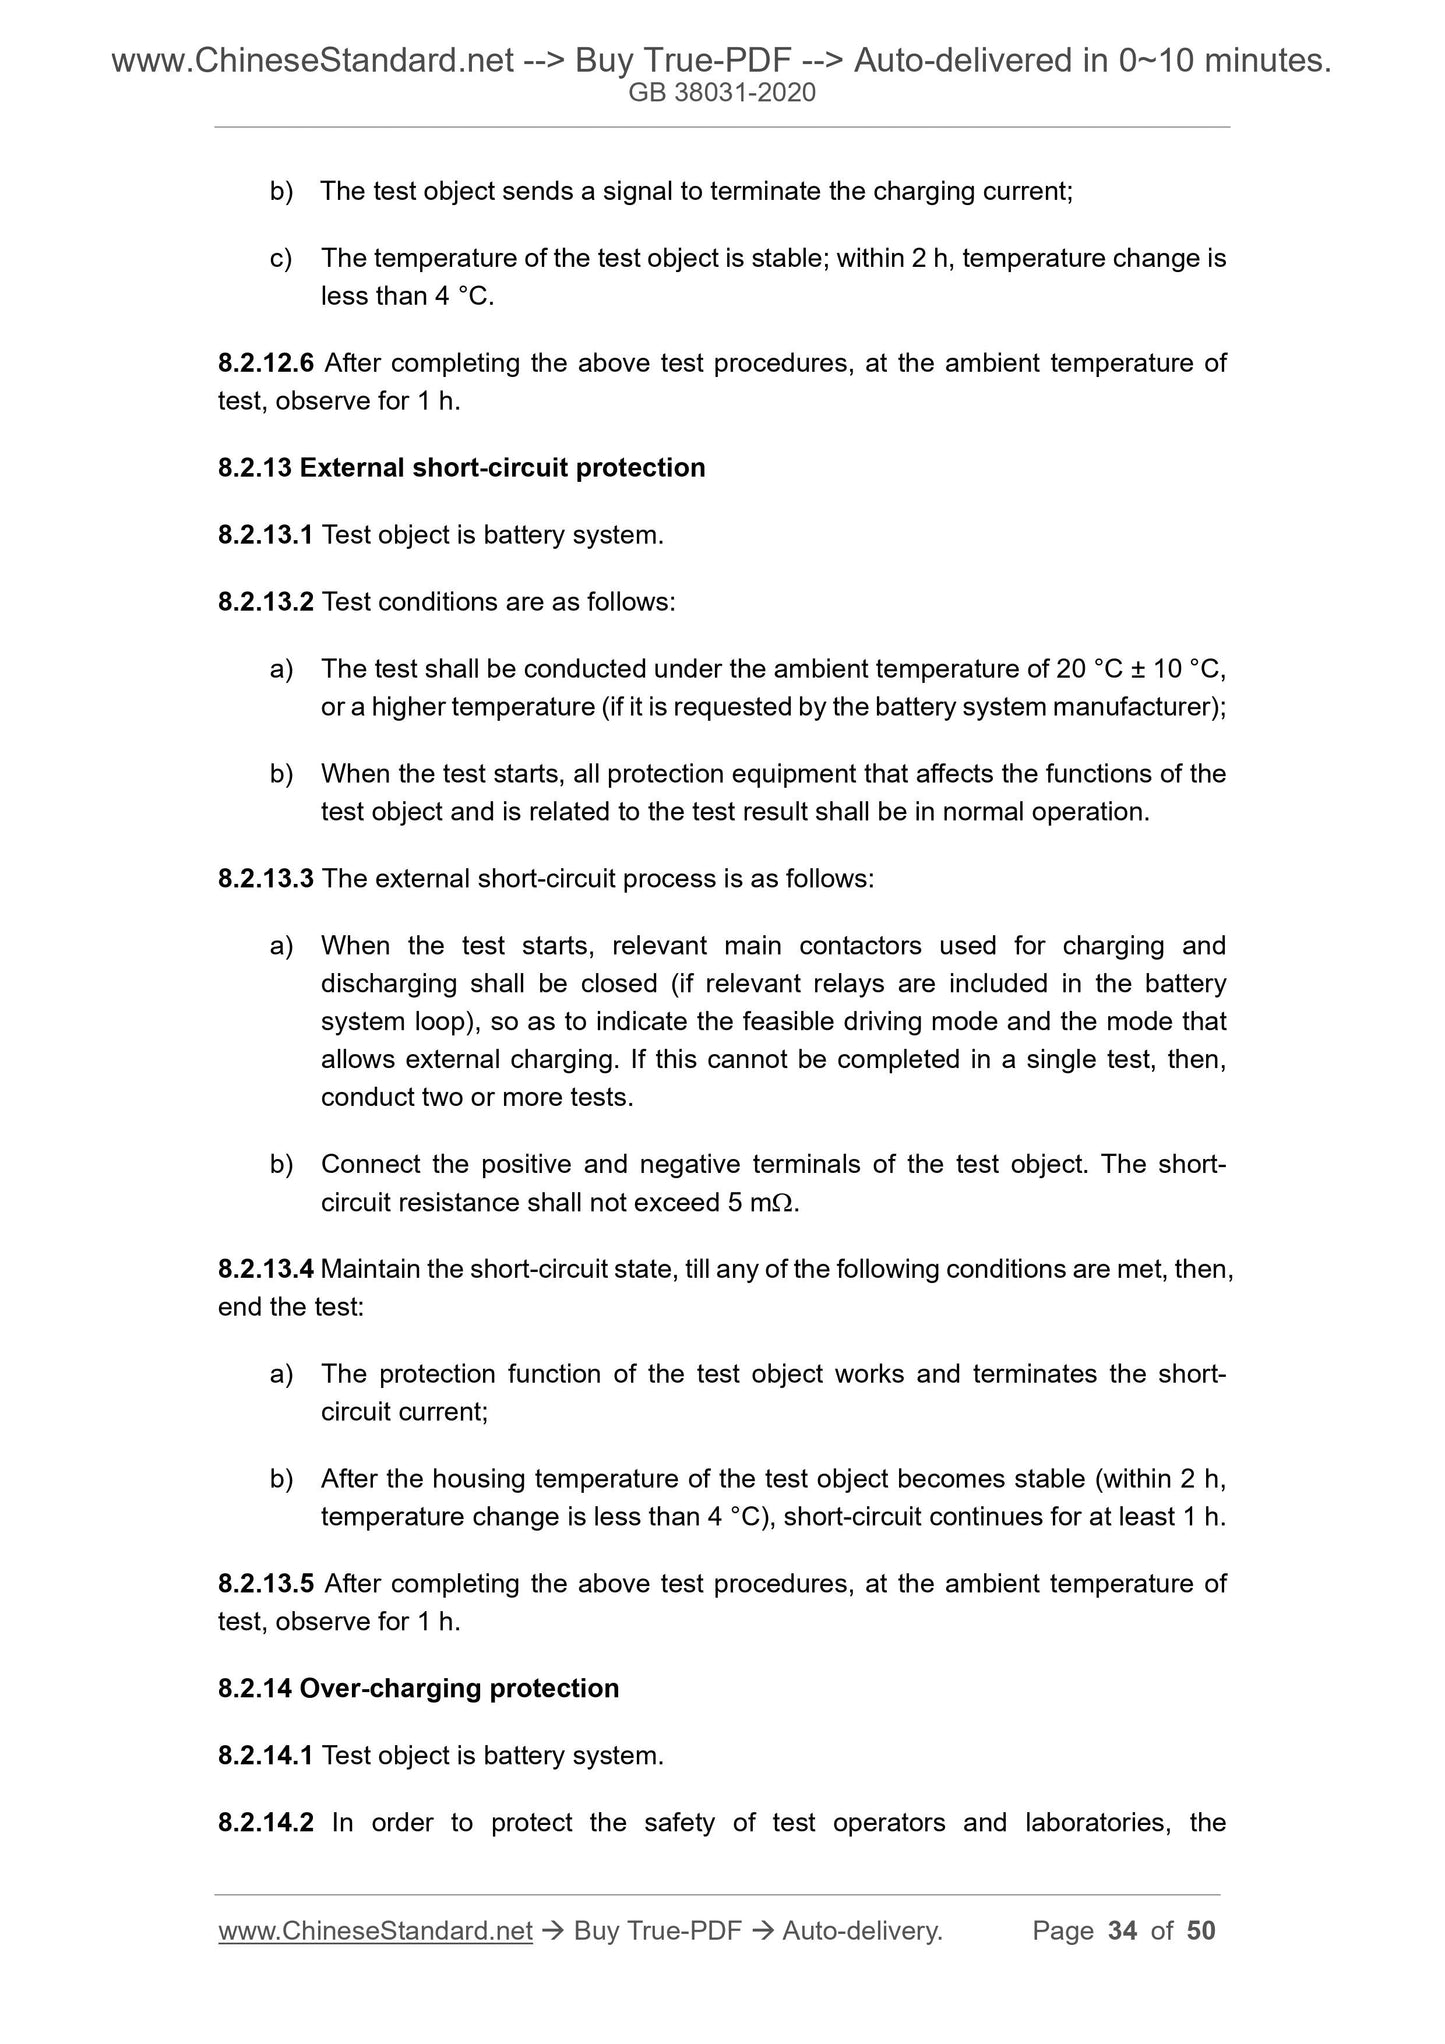 GB 38031-2020 Page 12